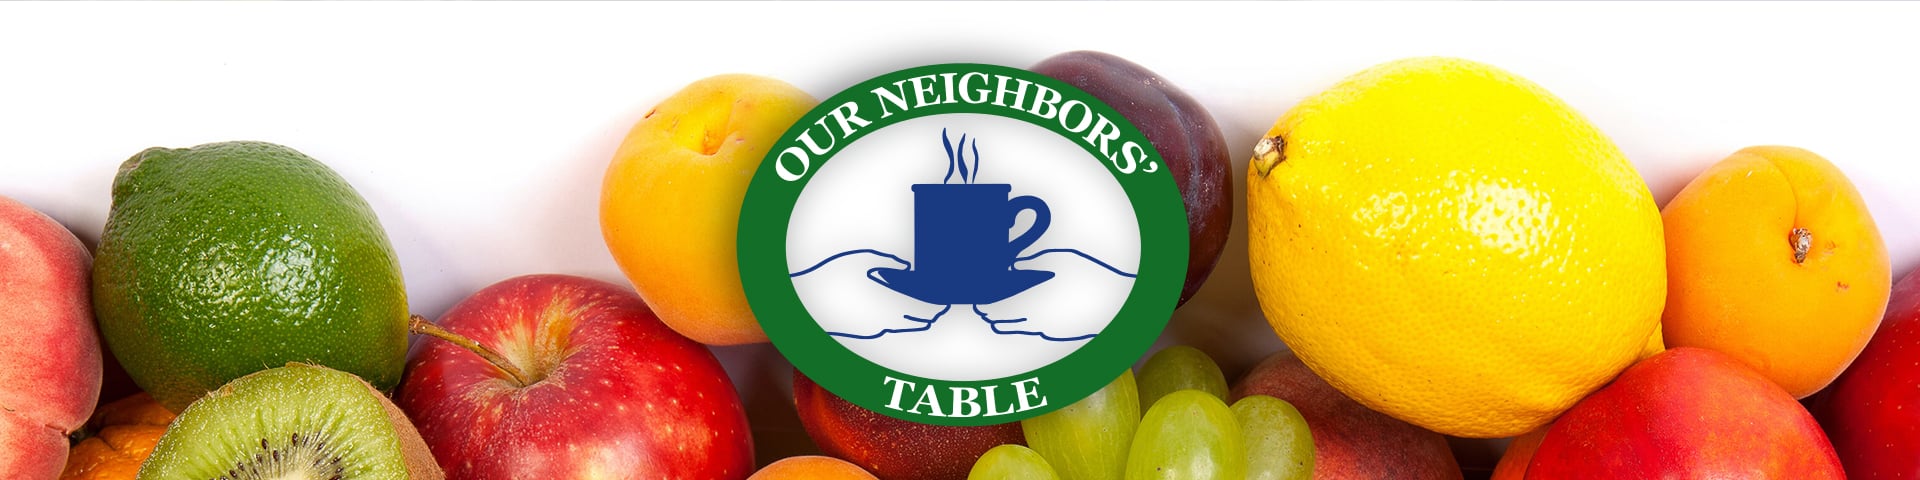 CNA Stores | Our Neighbors Table